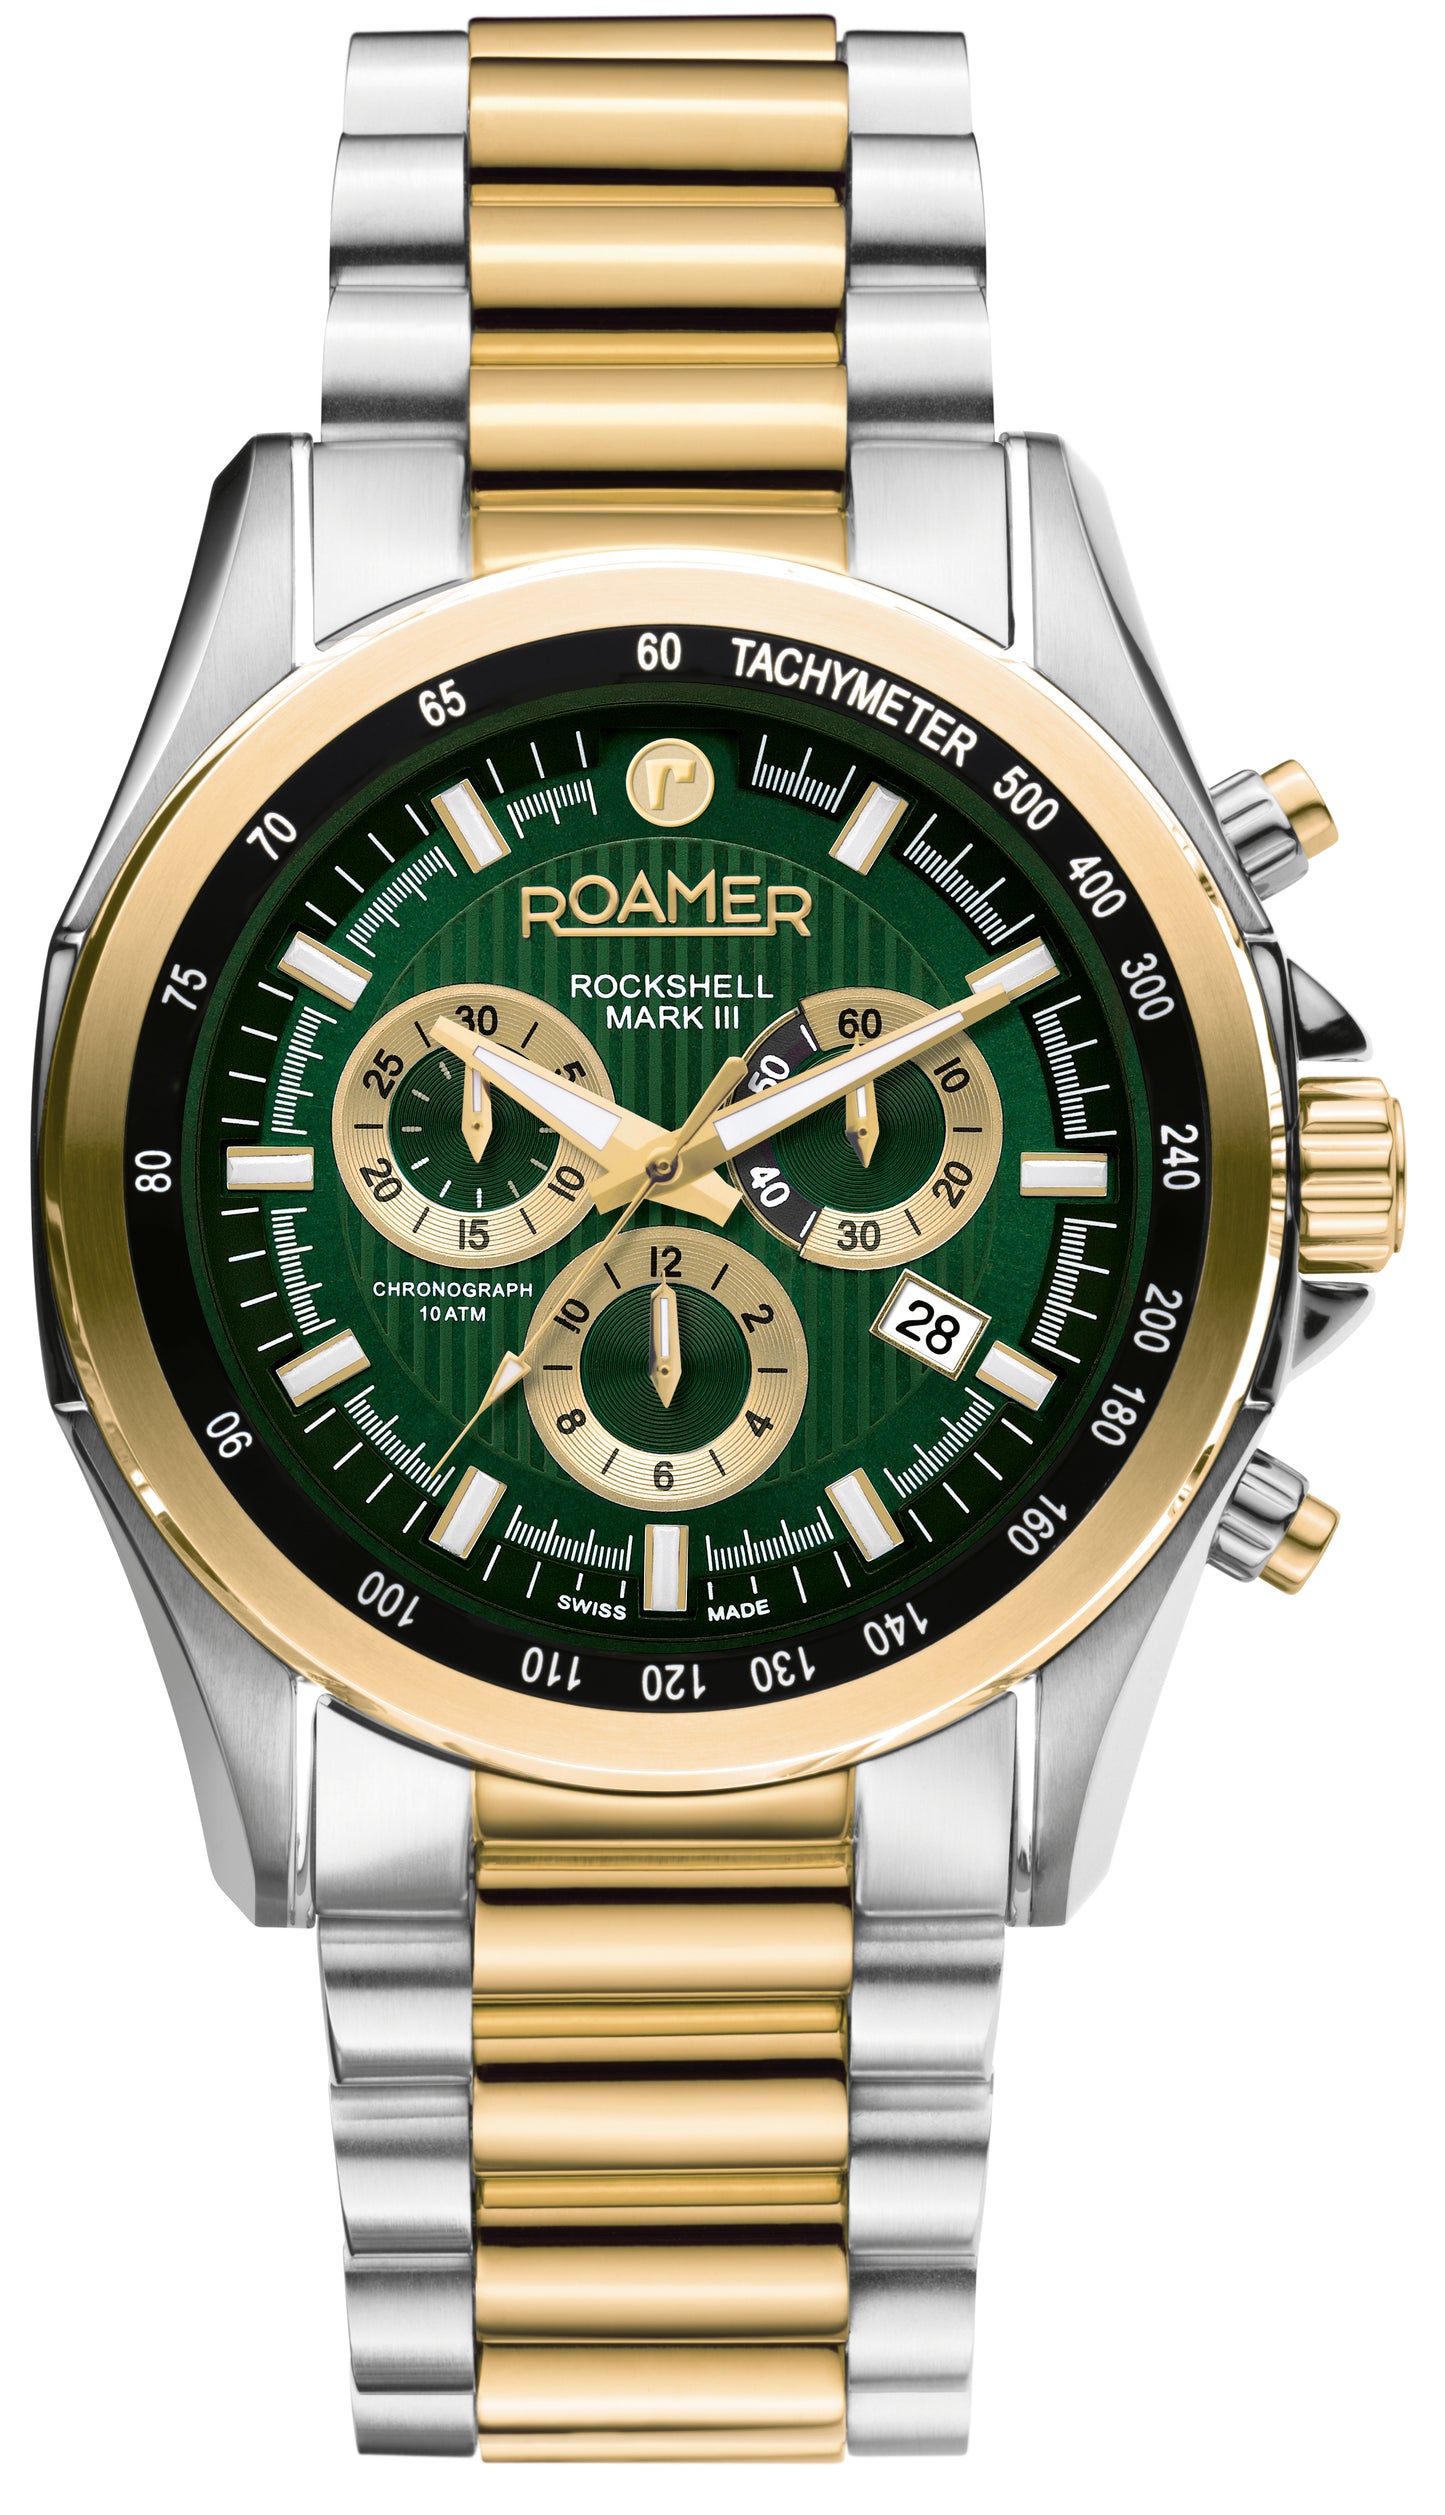 Roamer Rockshell Mark III Chrono Green Dial Yellow Gold Bi-colour Bracelet with Gold Accents